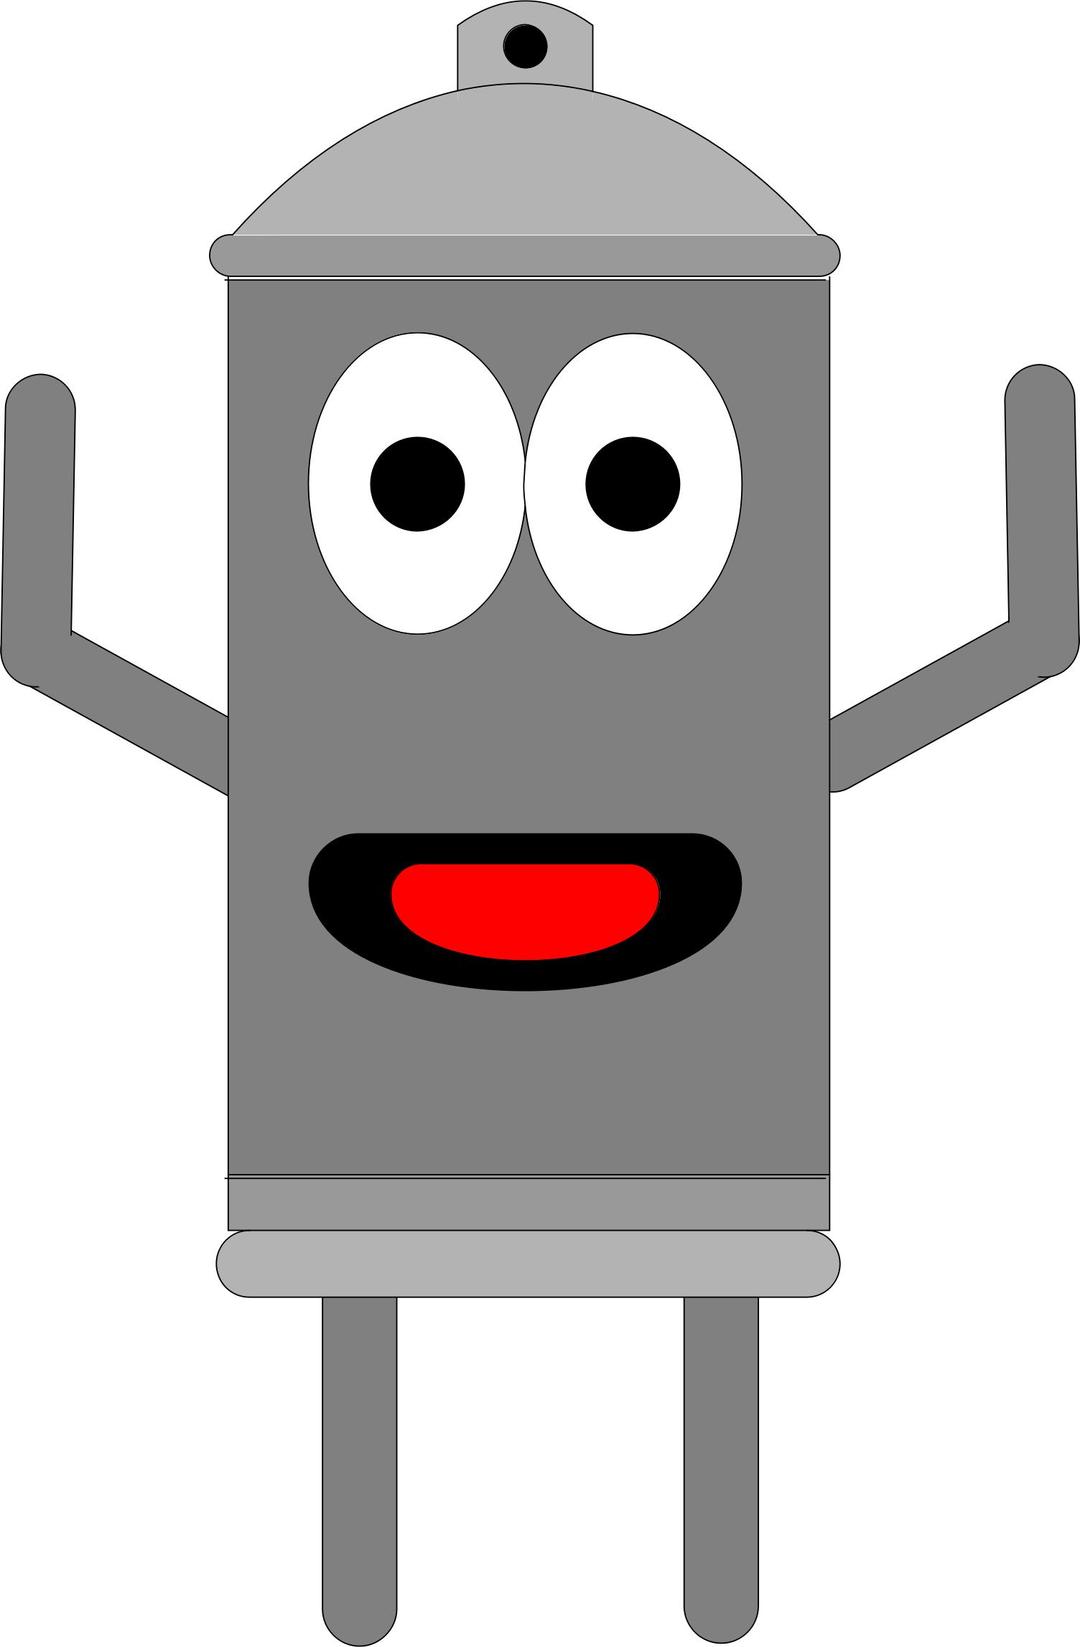 Anthropomorphic Spray Can png transparent